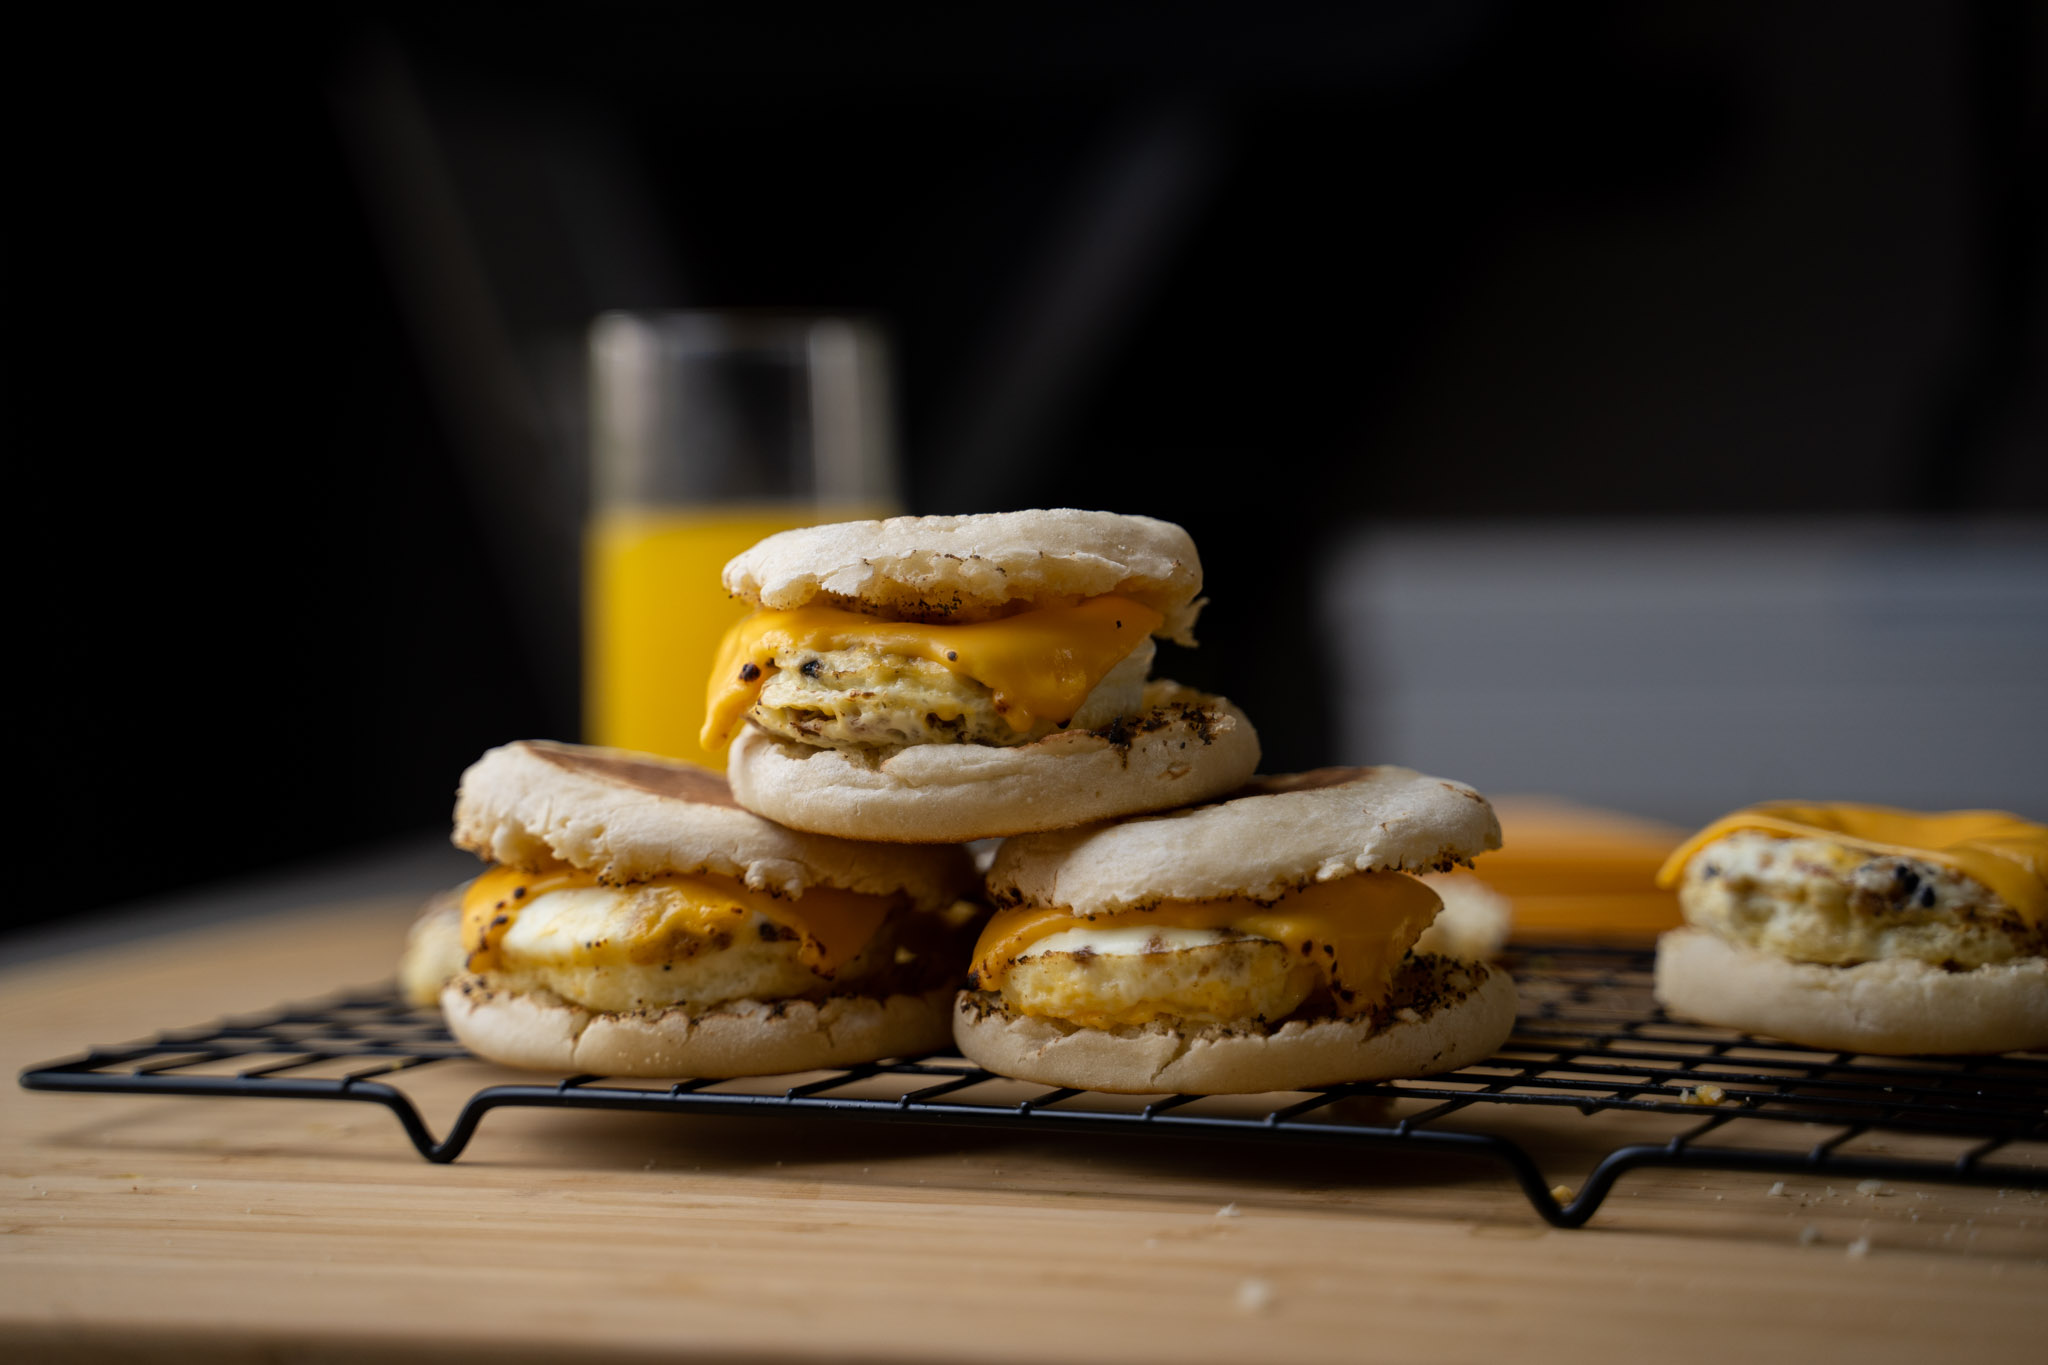 Make your morning routine better with this breakfast sandwich maker